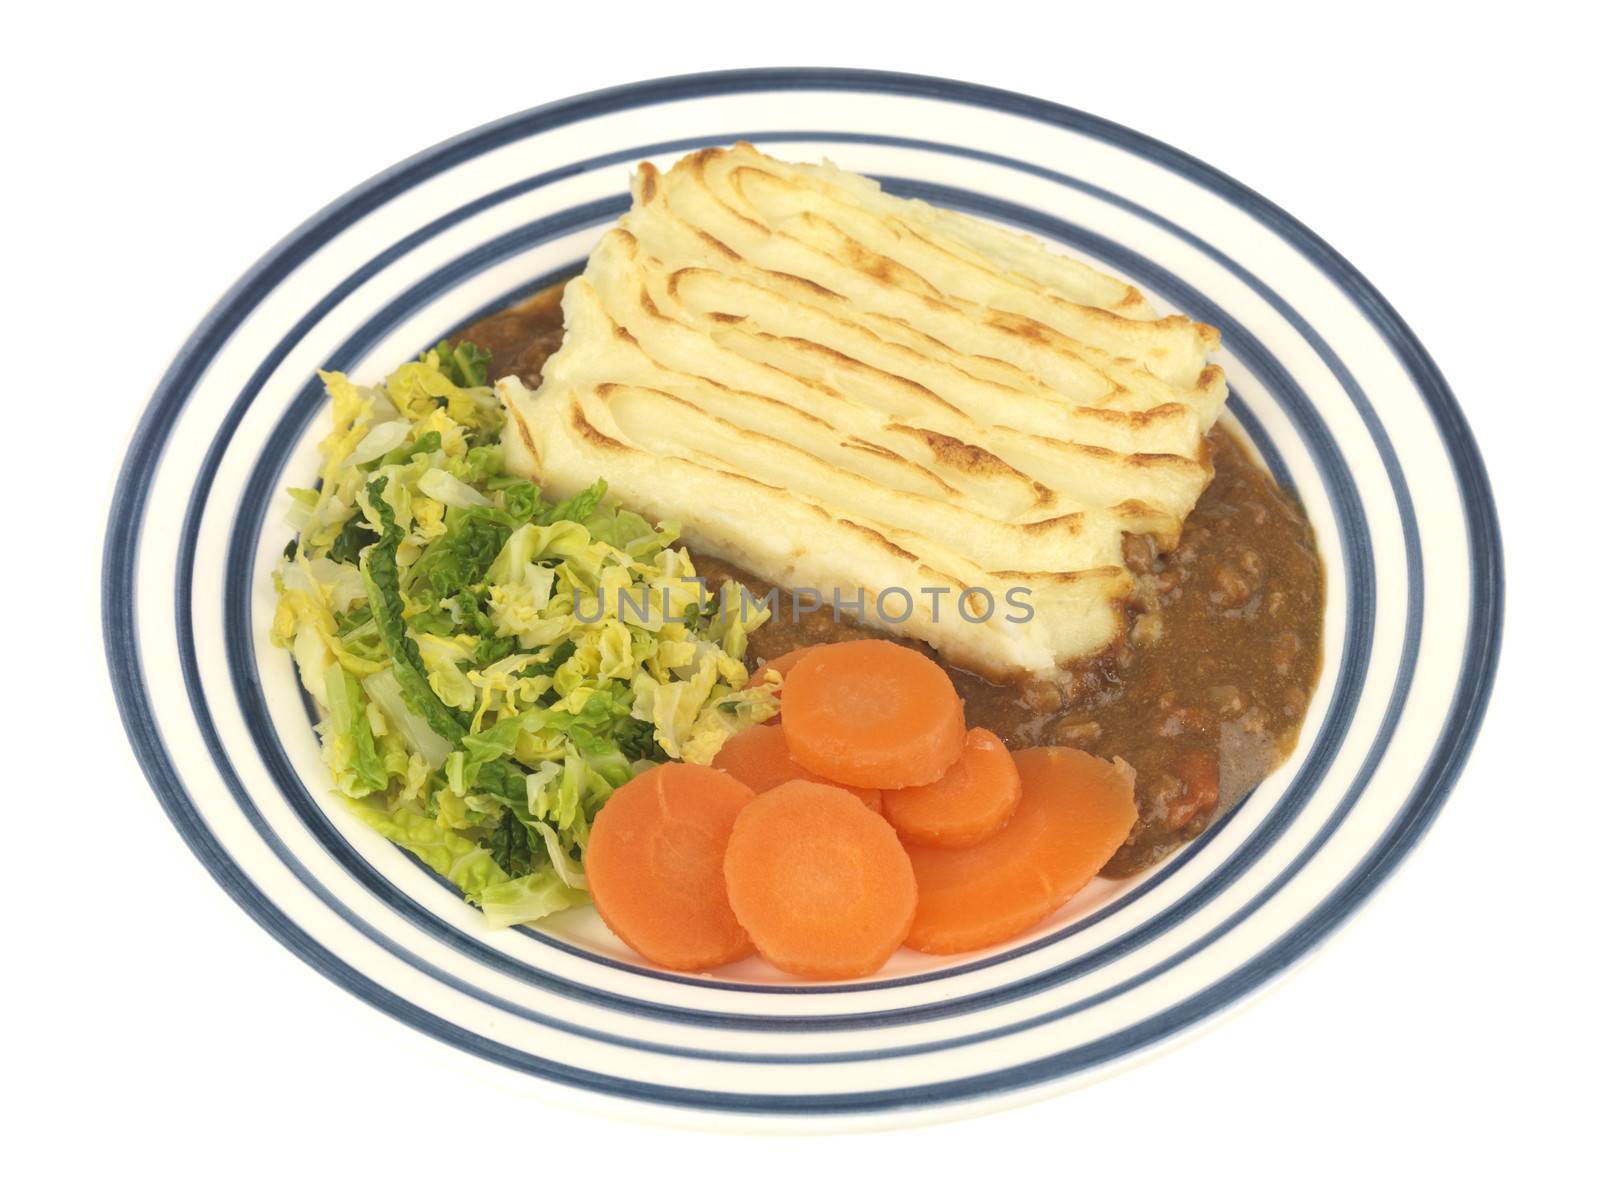 Shepherds Pie with Vegetables